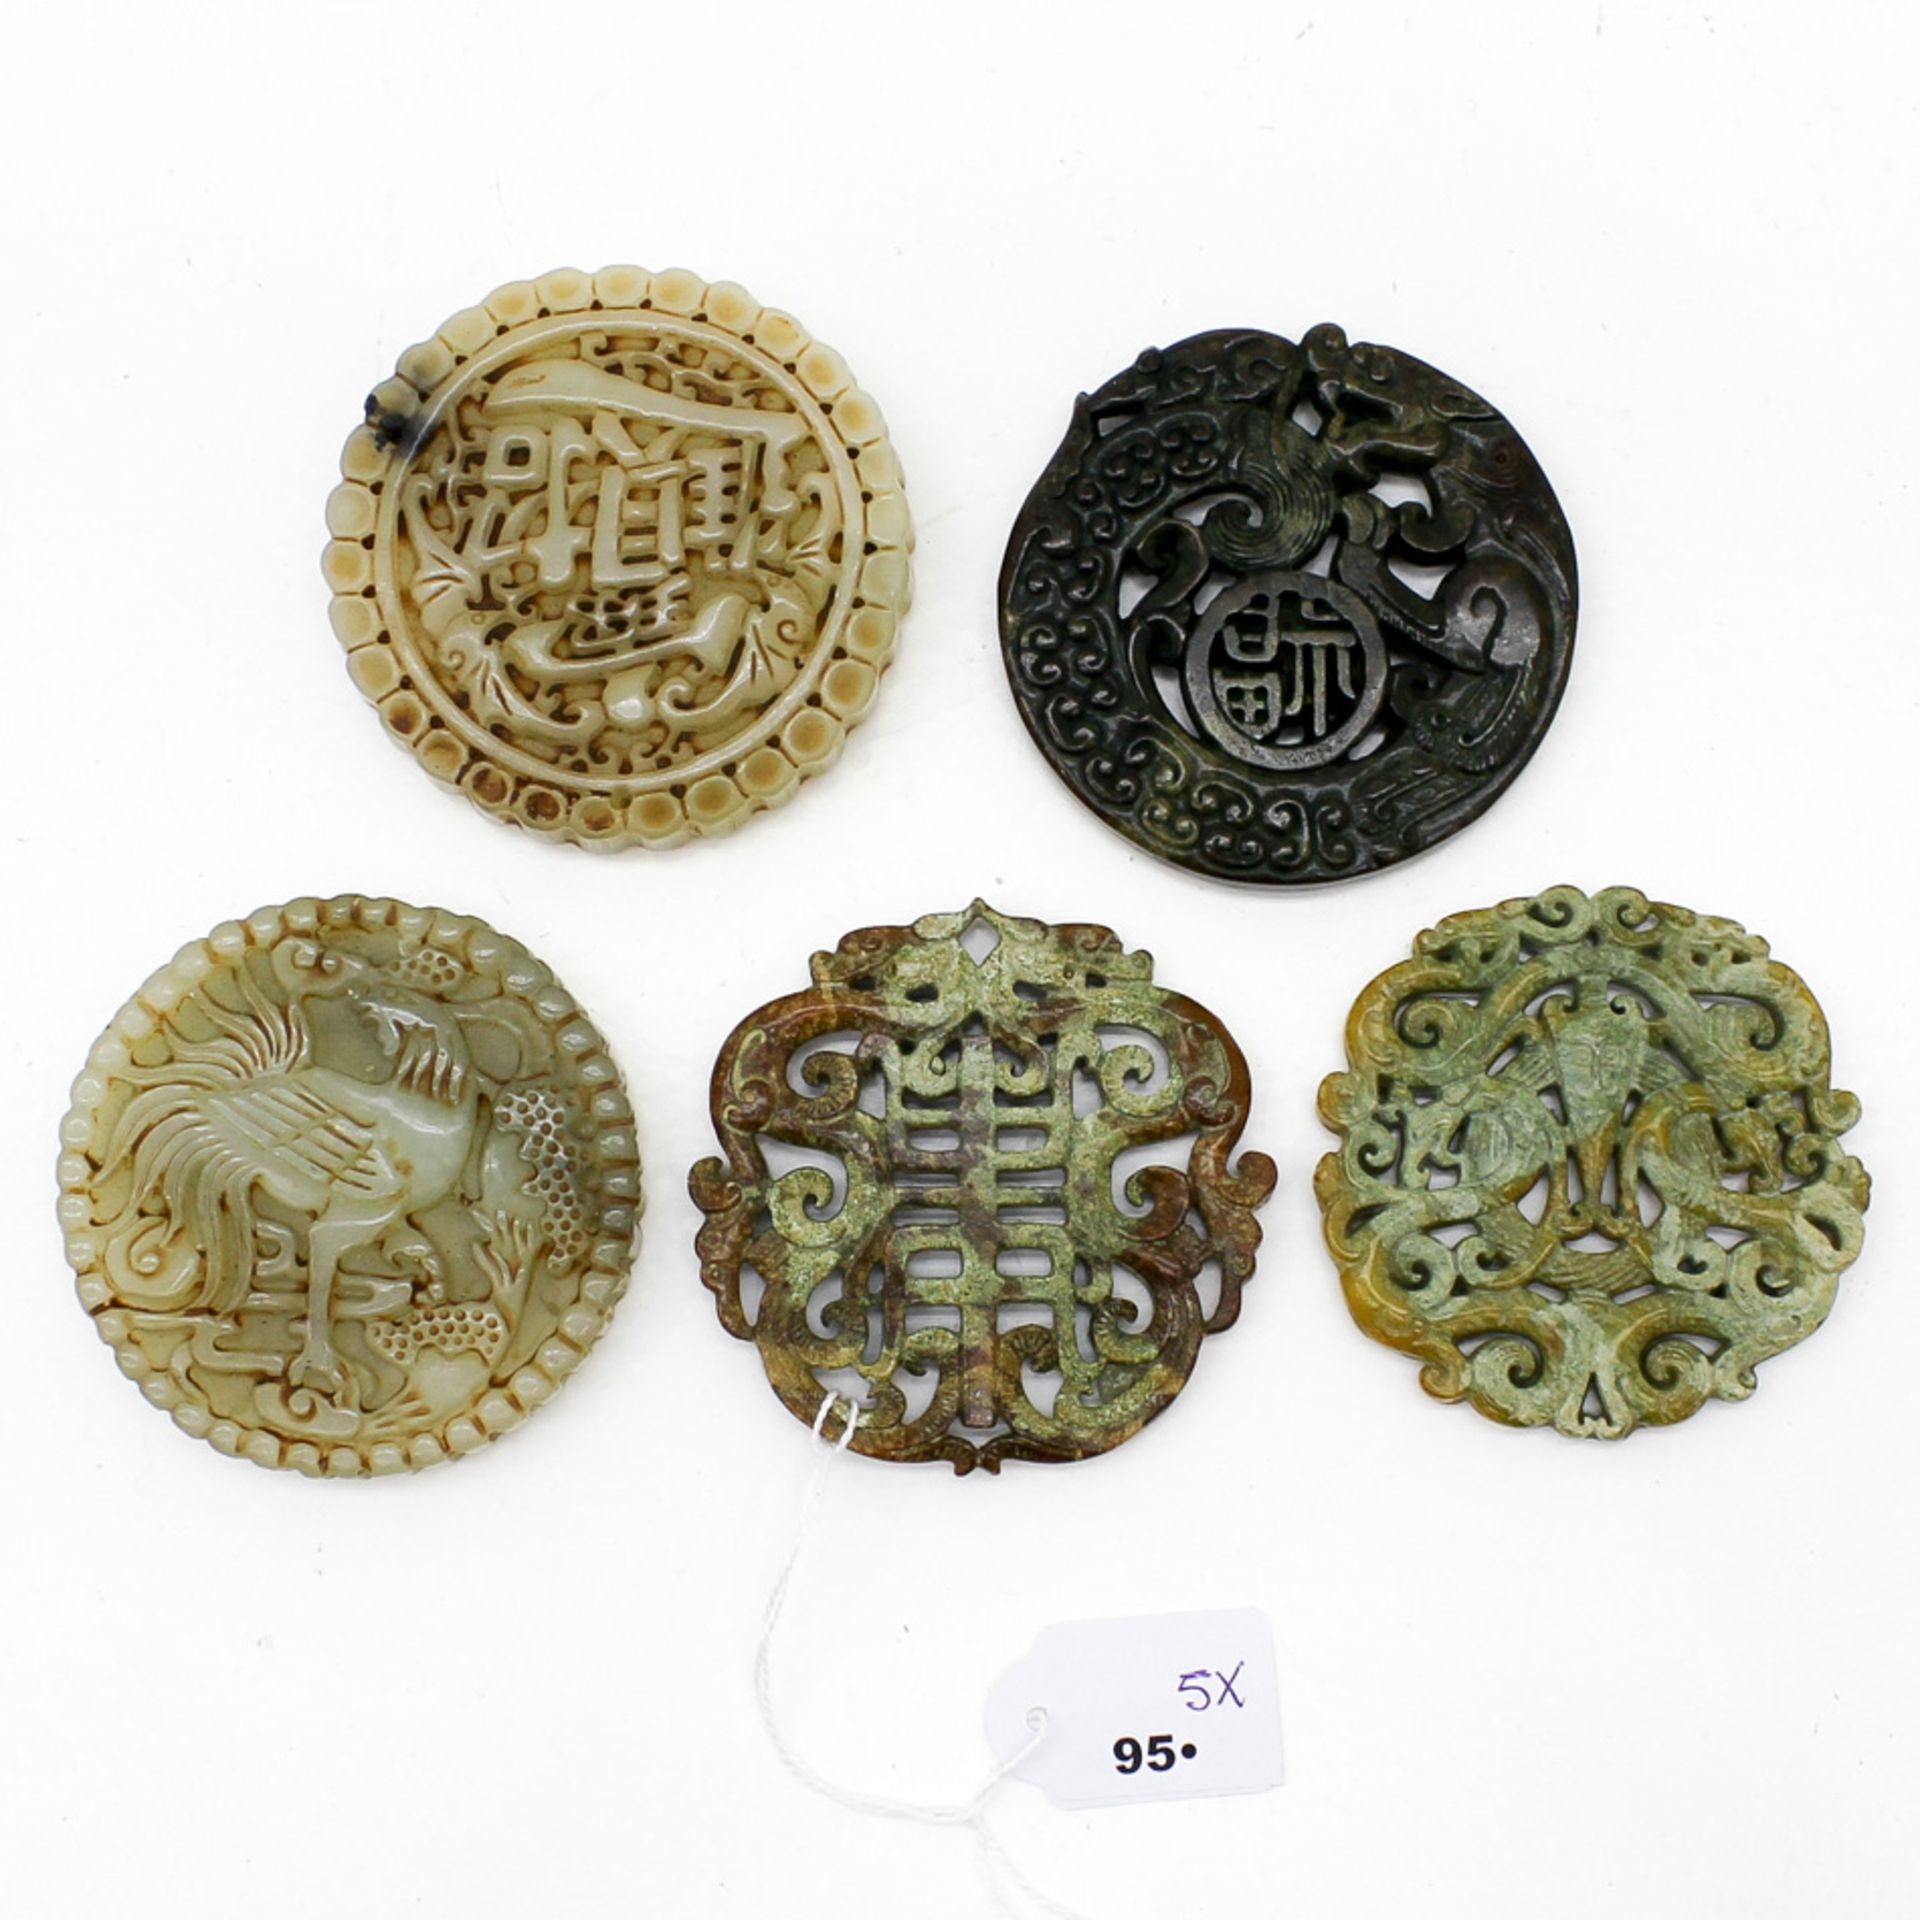 Lot of 5 Carved Chinese Jade Plaques 7 cm in diameter.